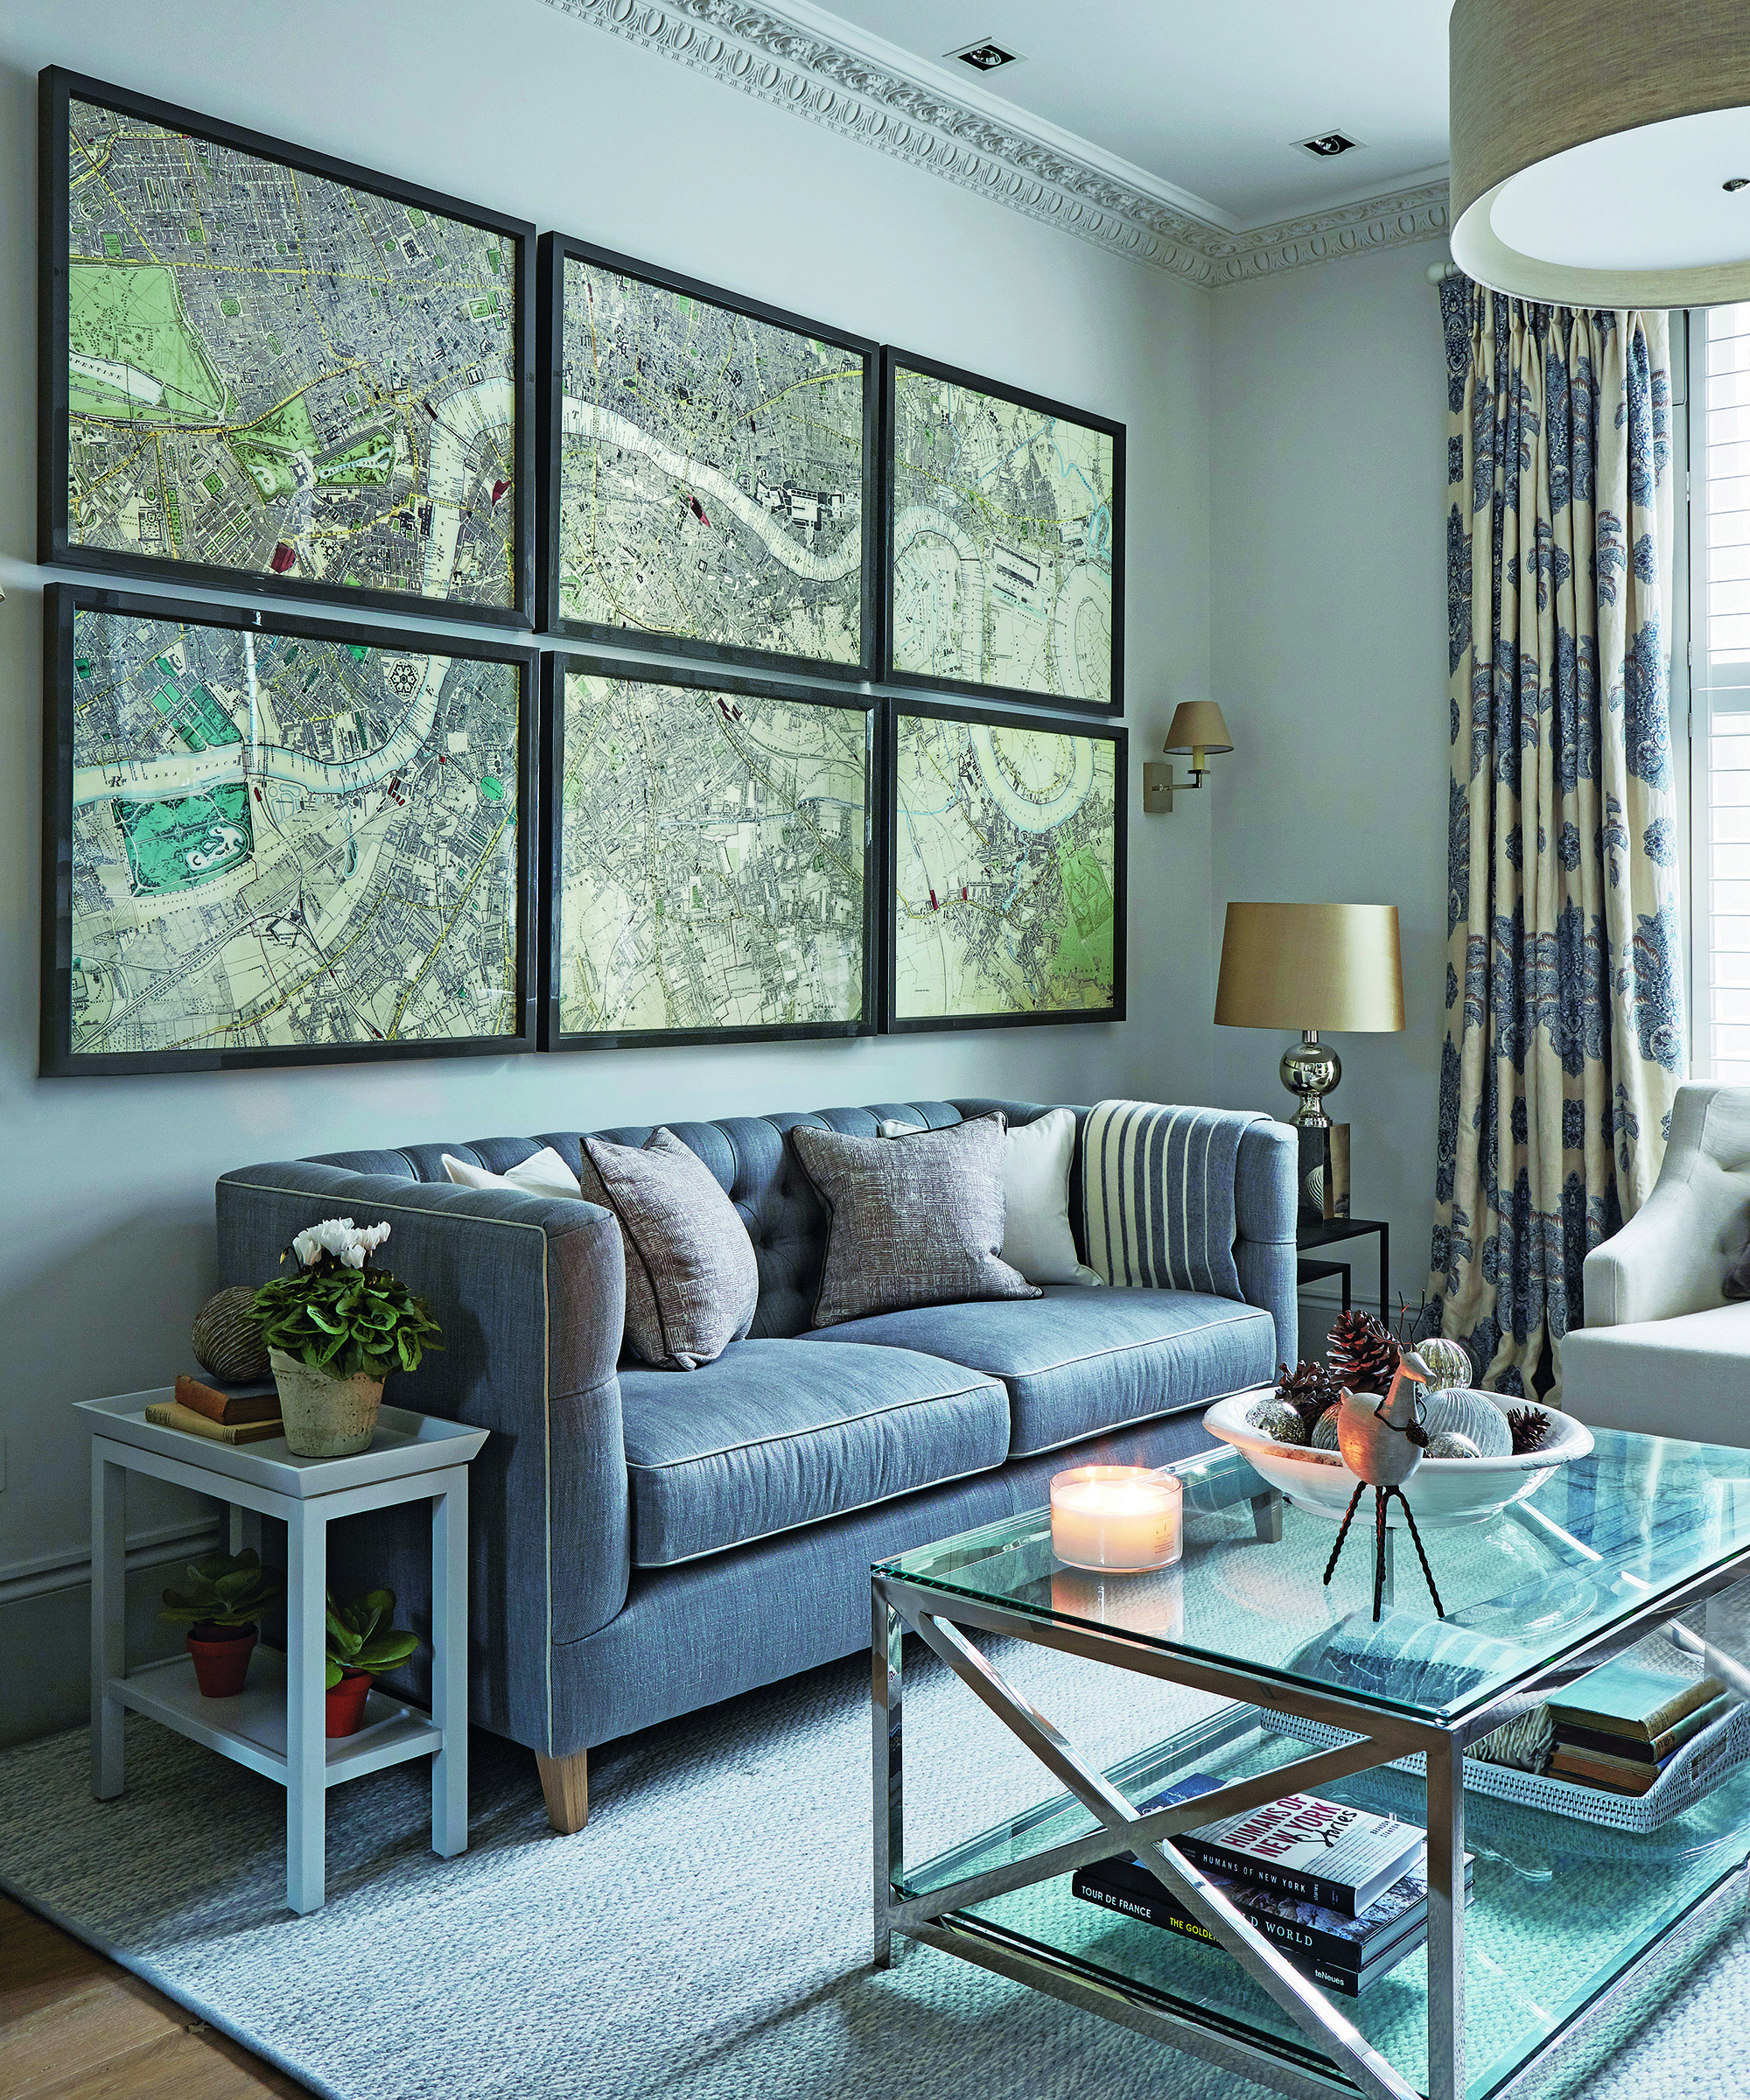 A grey living room with framed map prints and glass coffee table.